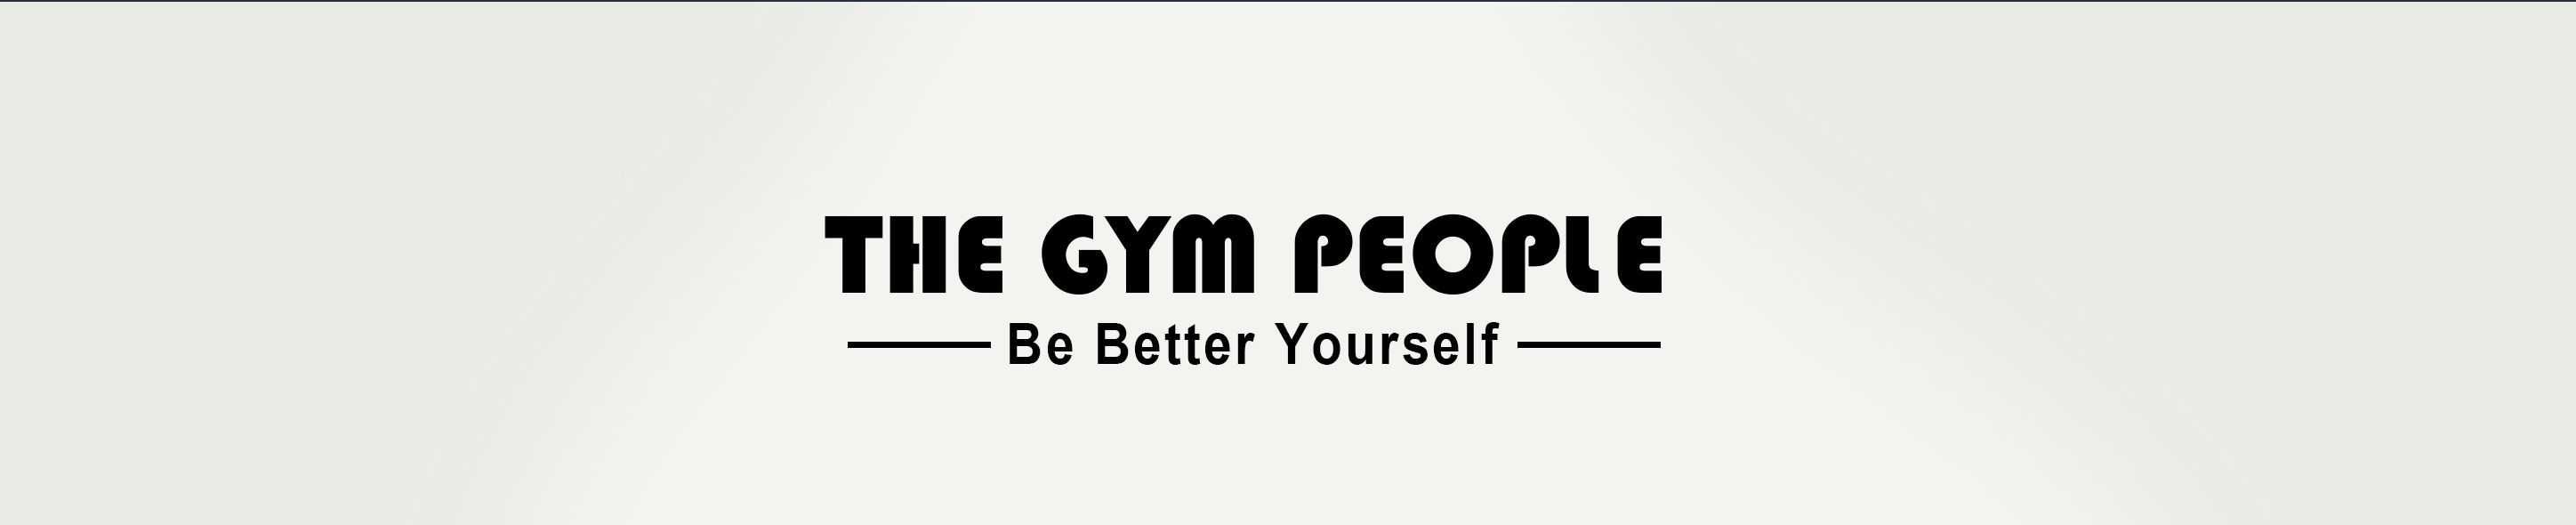 The Gym People